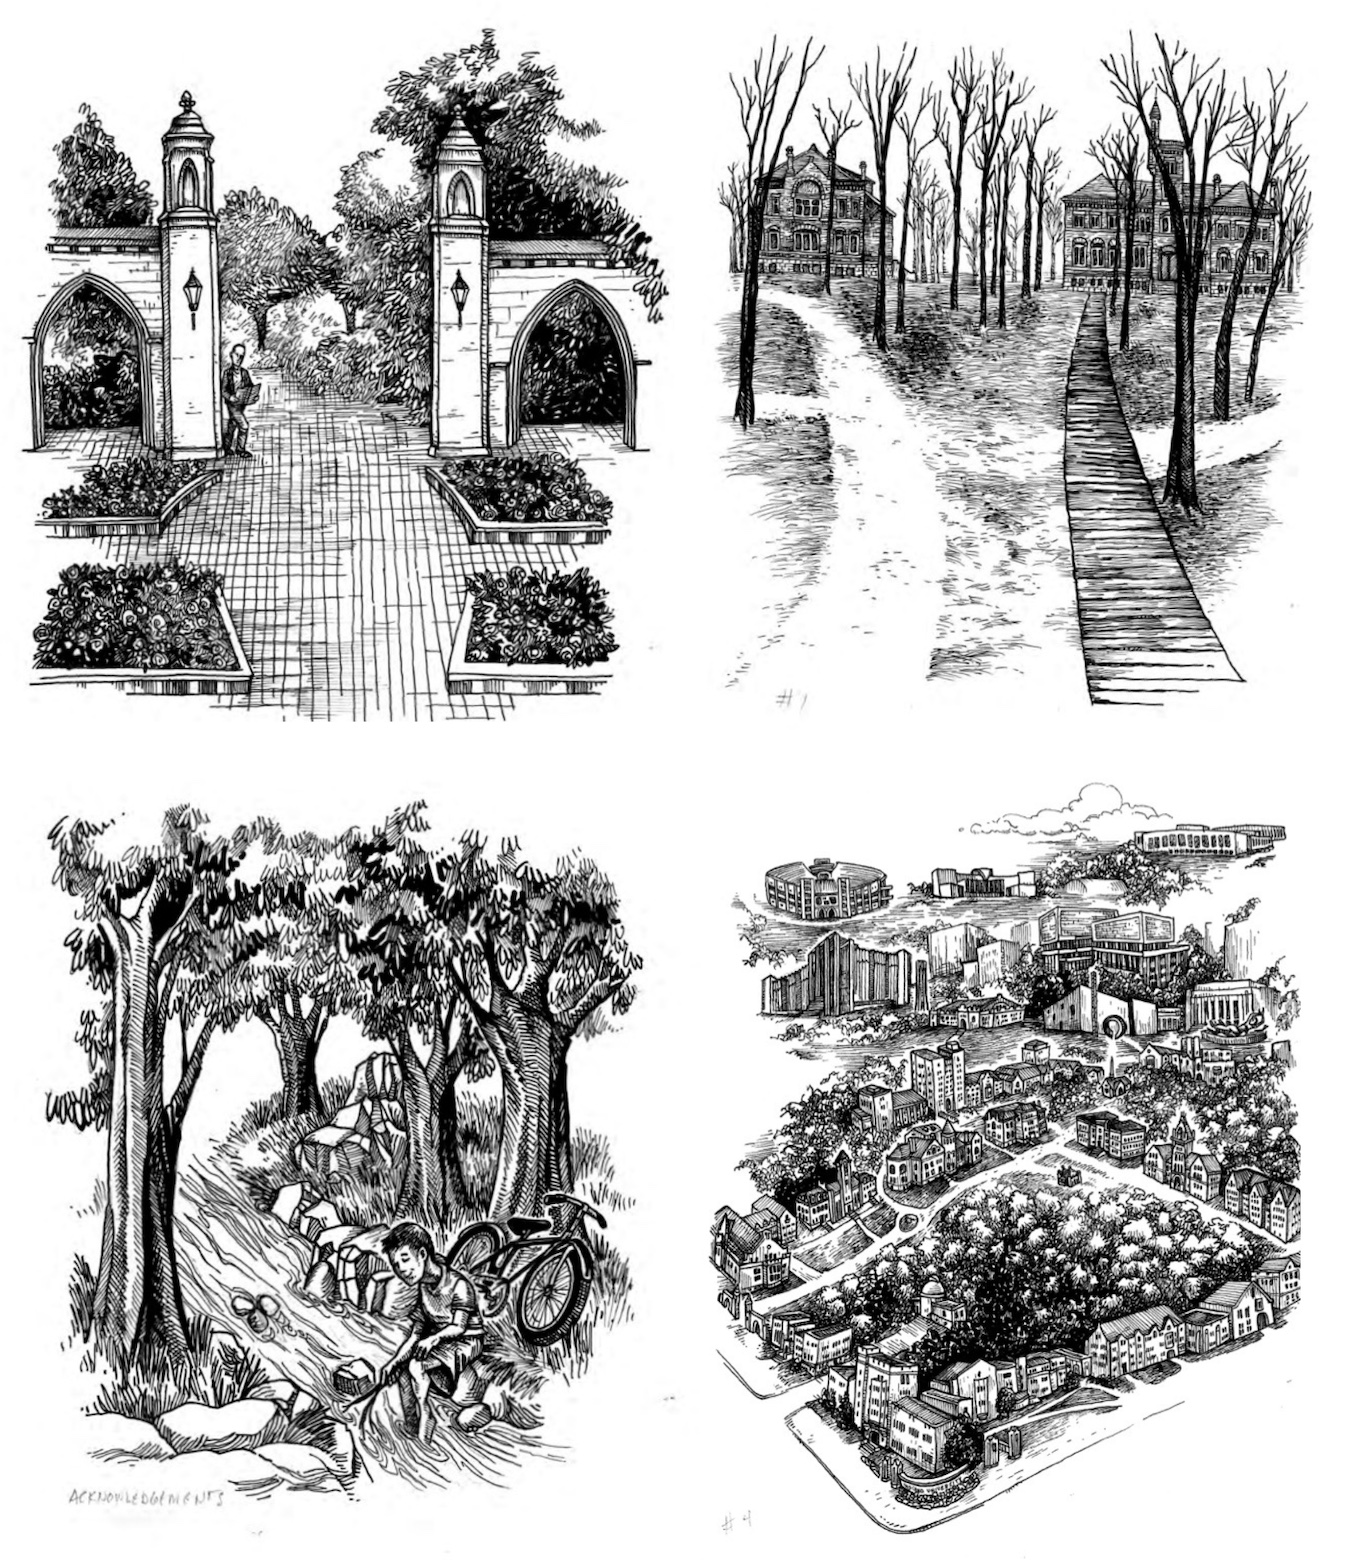 Campus illustrations by Joe Lee for an upcoming book by IU historian and professor James Capshew. (clockwise from top left) Sample Gates, Owen Hall and Wylie Hall (original buildings), Dunn’s Woods and environs, and the Campus River. | Reprinted courtesy of James Capshew